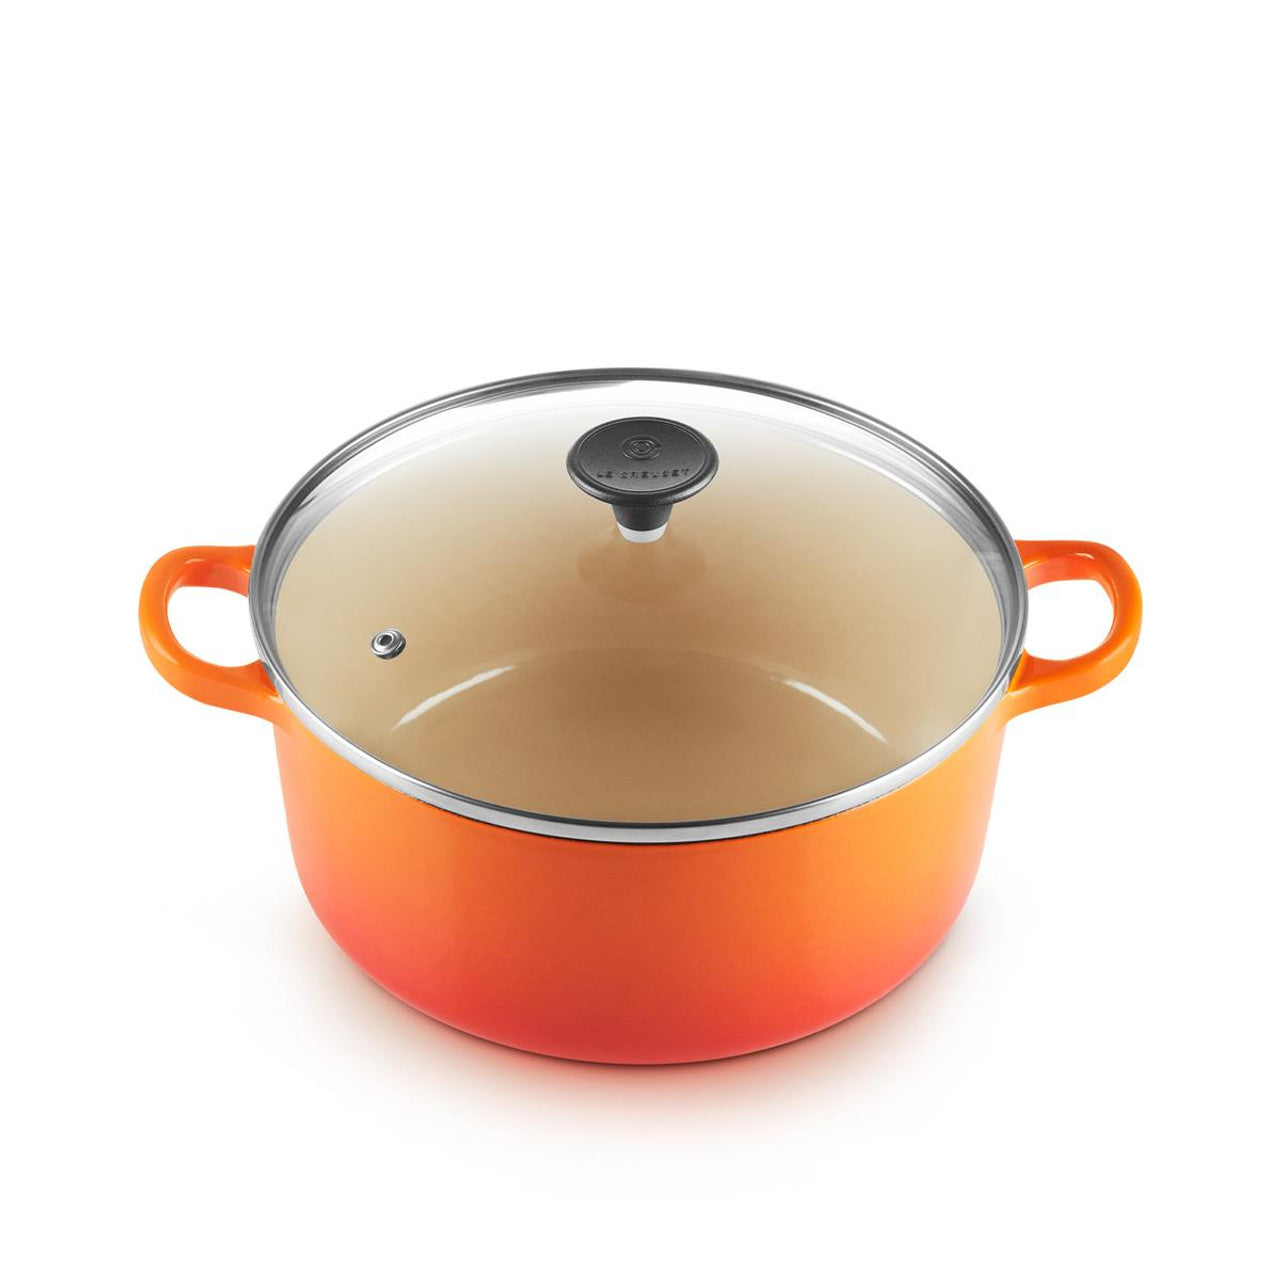 Le Creuset Cast Iron 22cm Round Casserole with Glass Lid in Volcanic